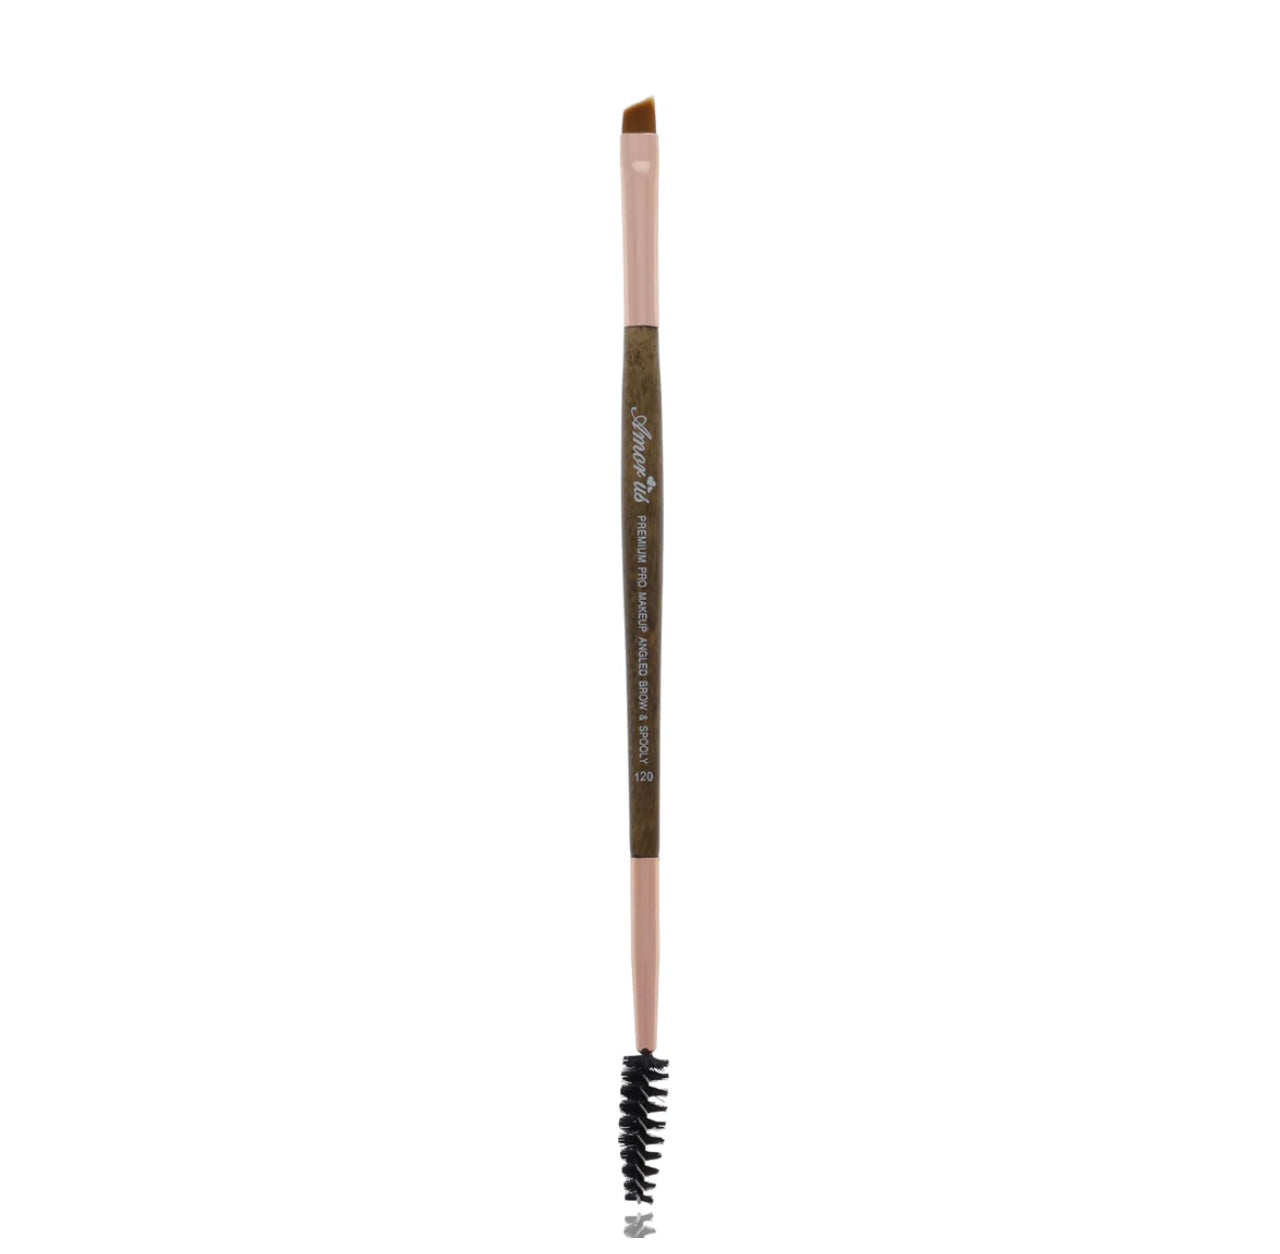 Brow & Liner Duo Brush (120) by Amorus